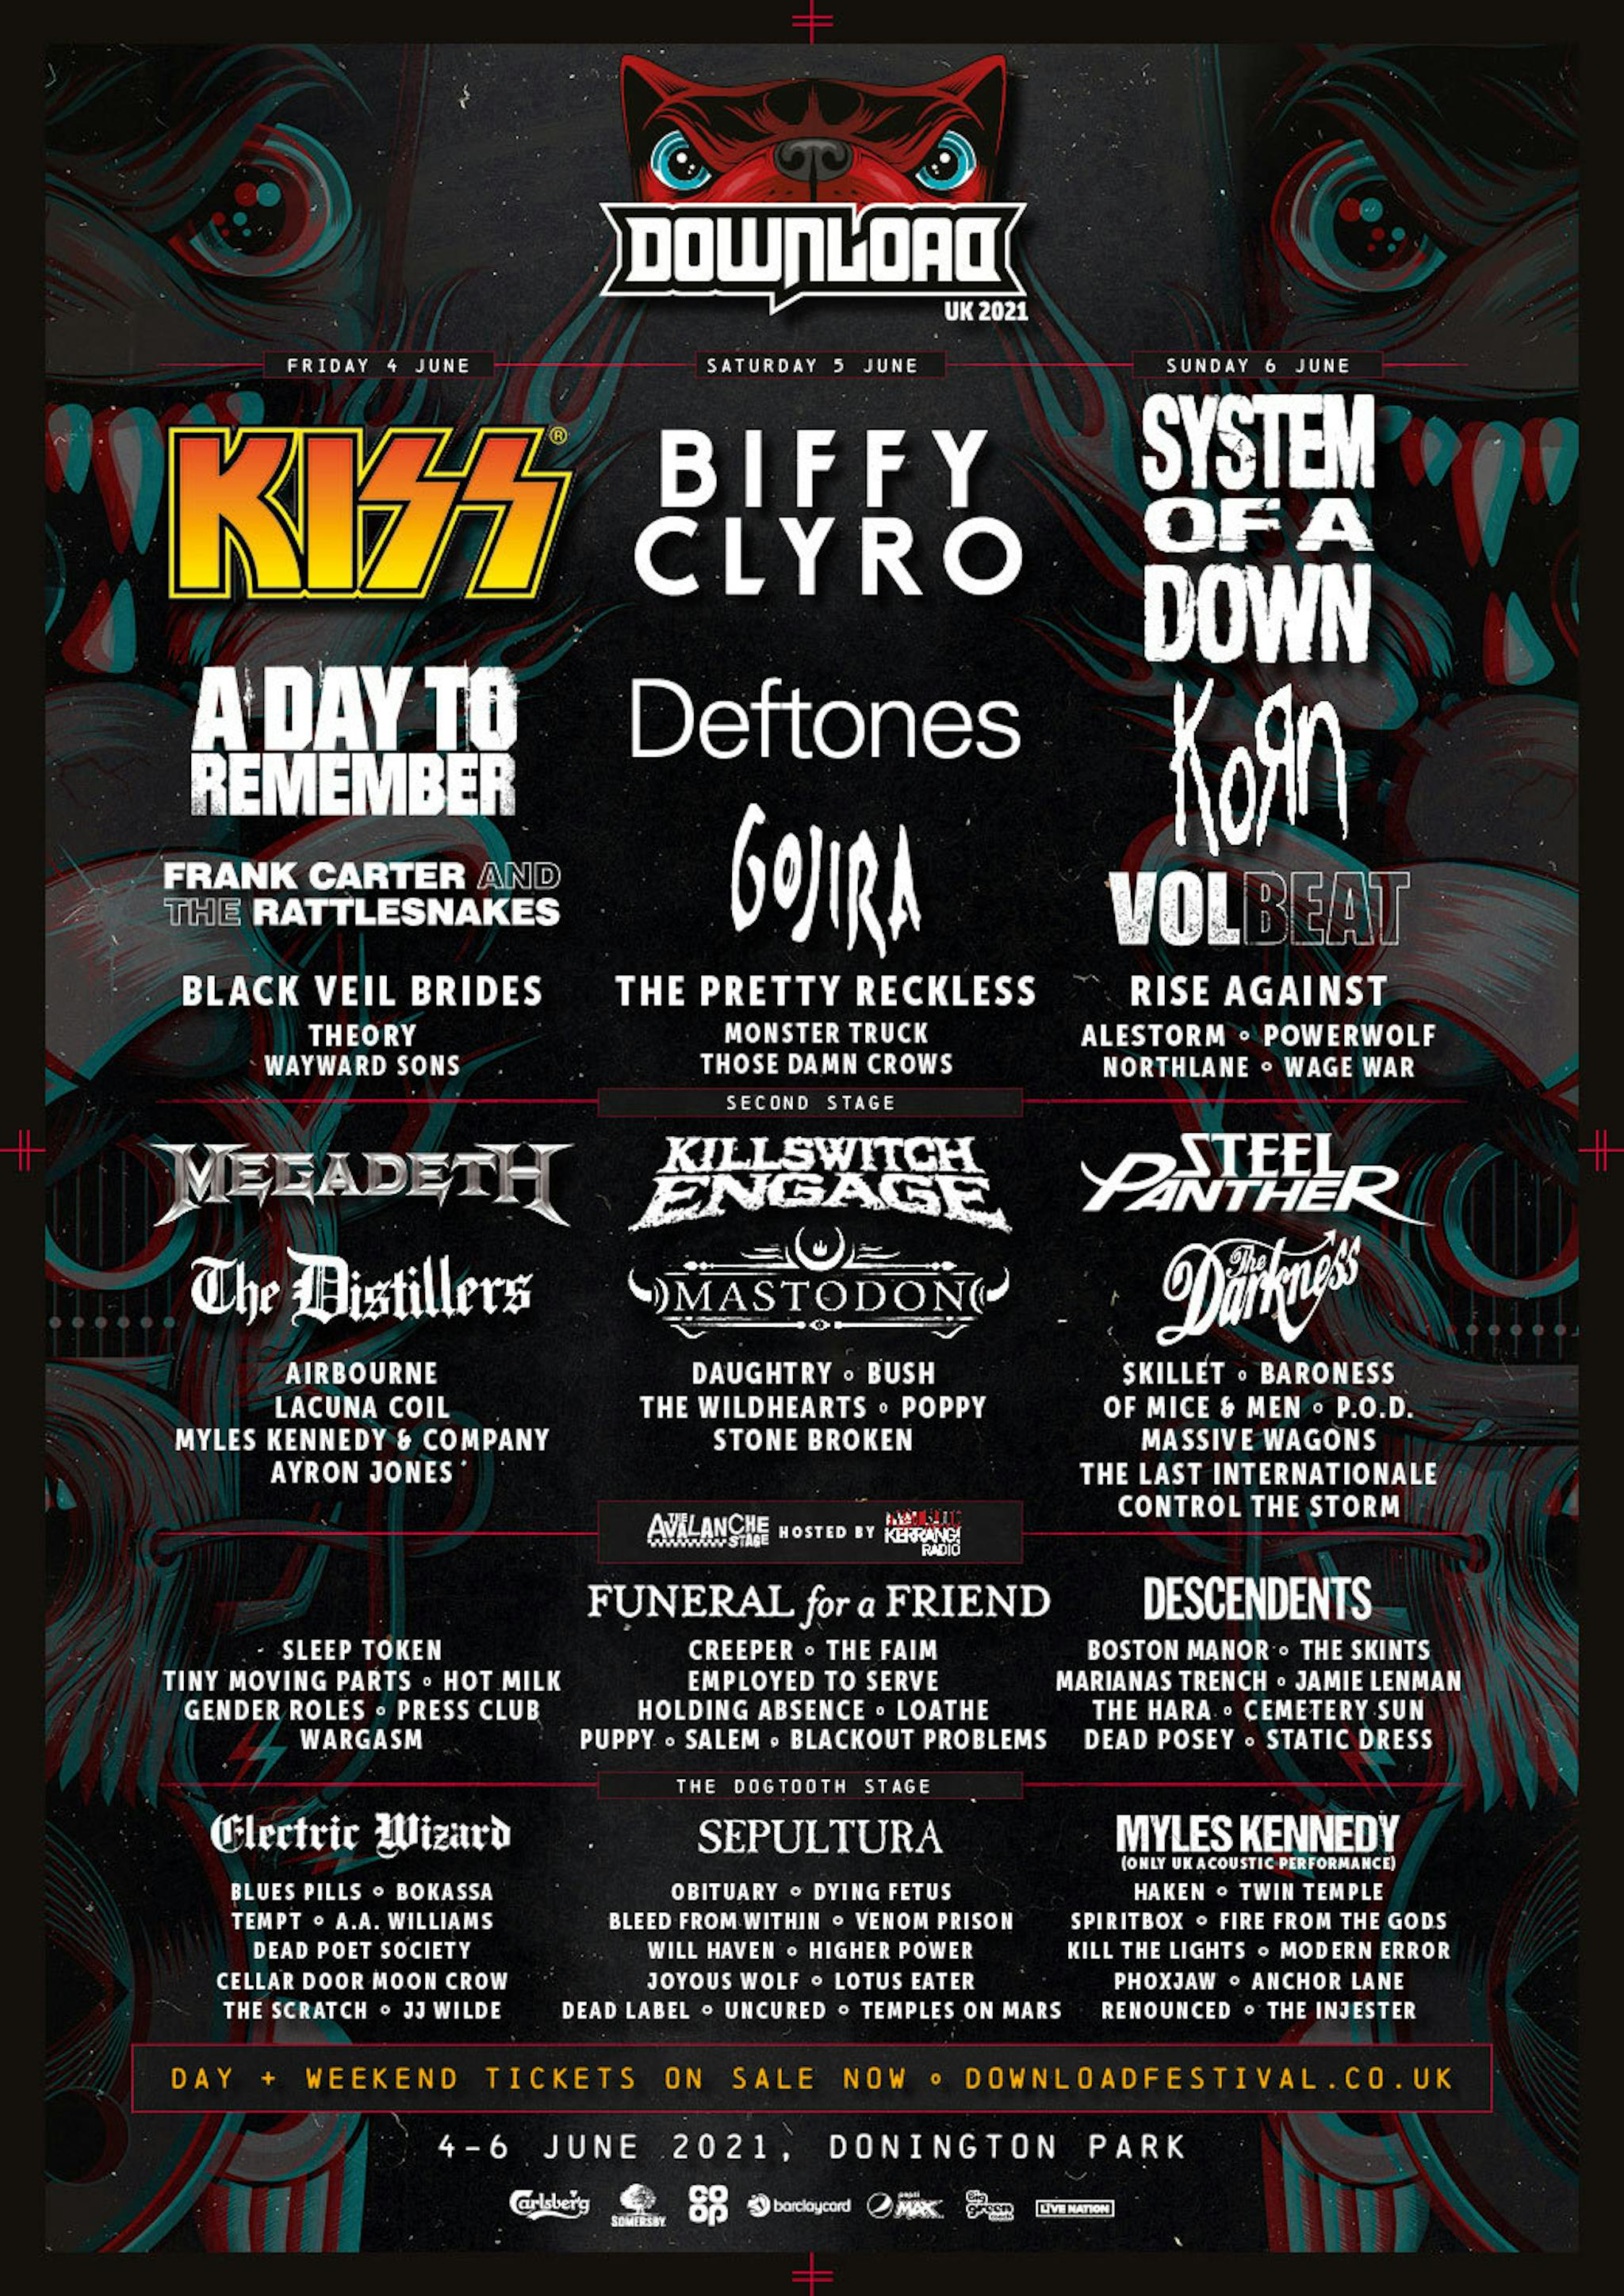 Download2021 Poster 29 Oct2020